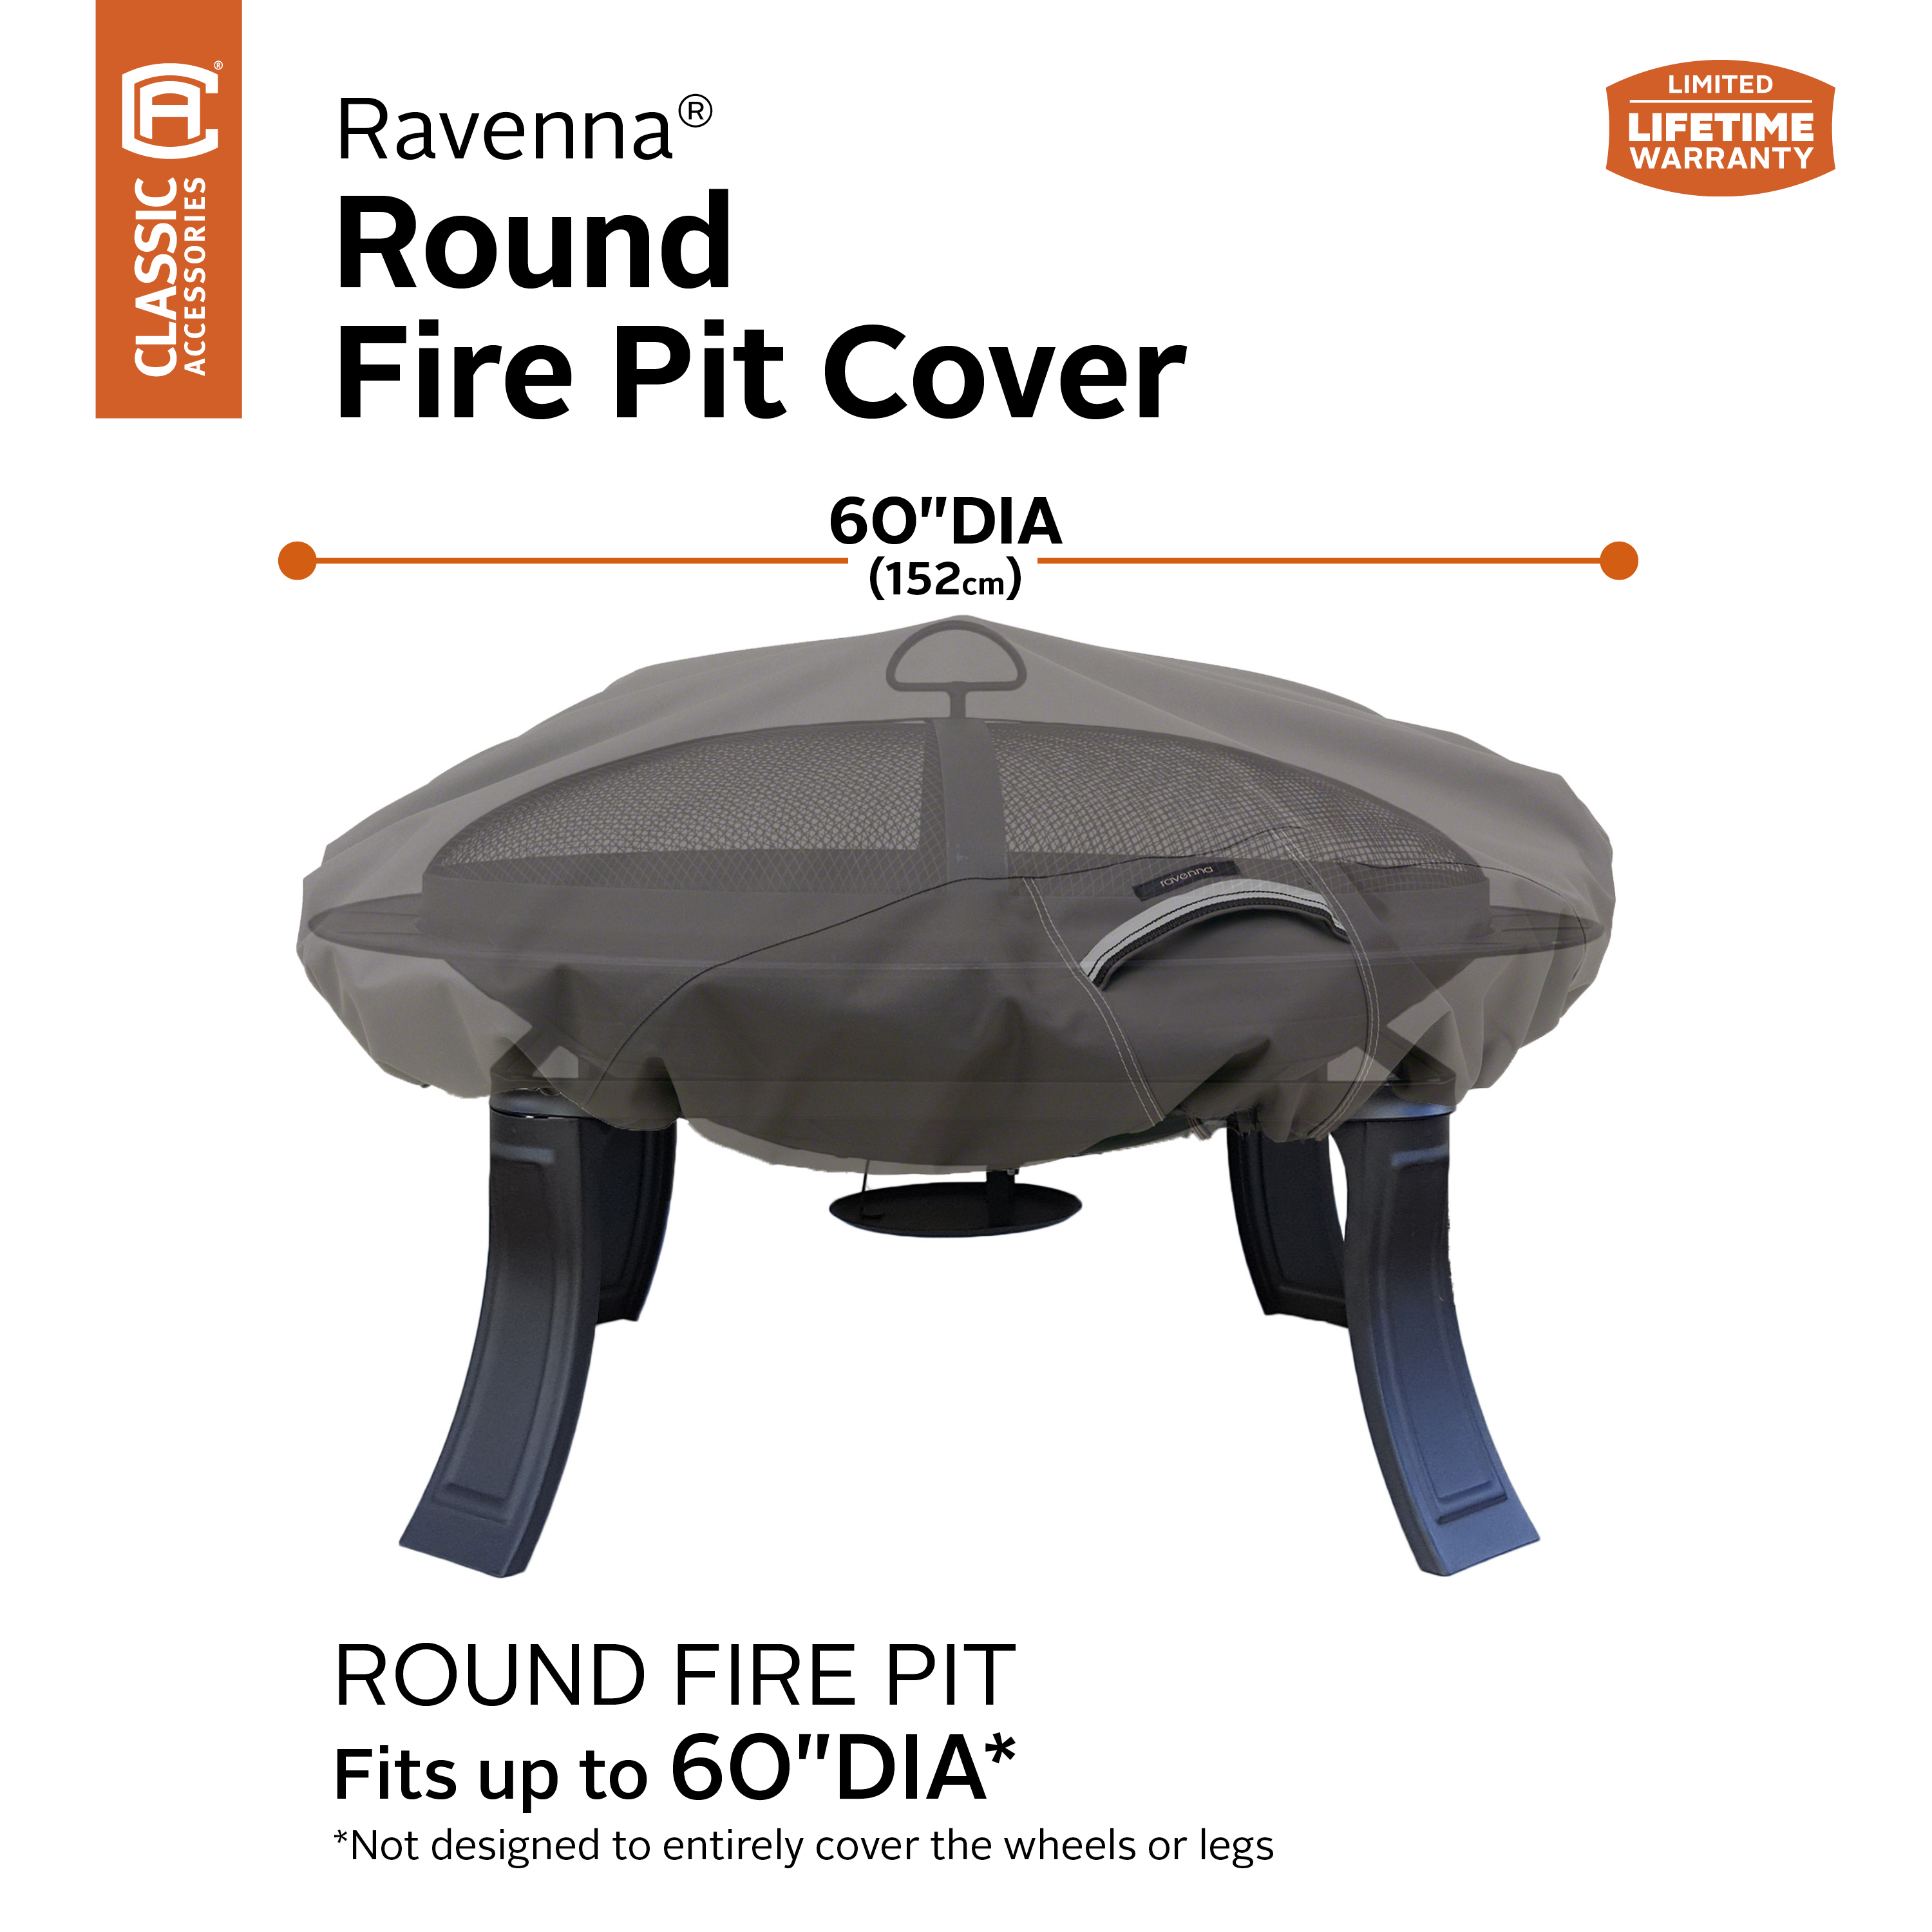 Classic Accessories Ravenna Water-Resistant 60 Inch Round Fire Pit Cover - image 4 of 19